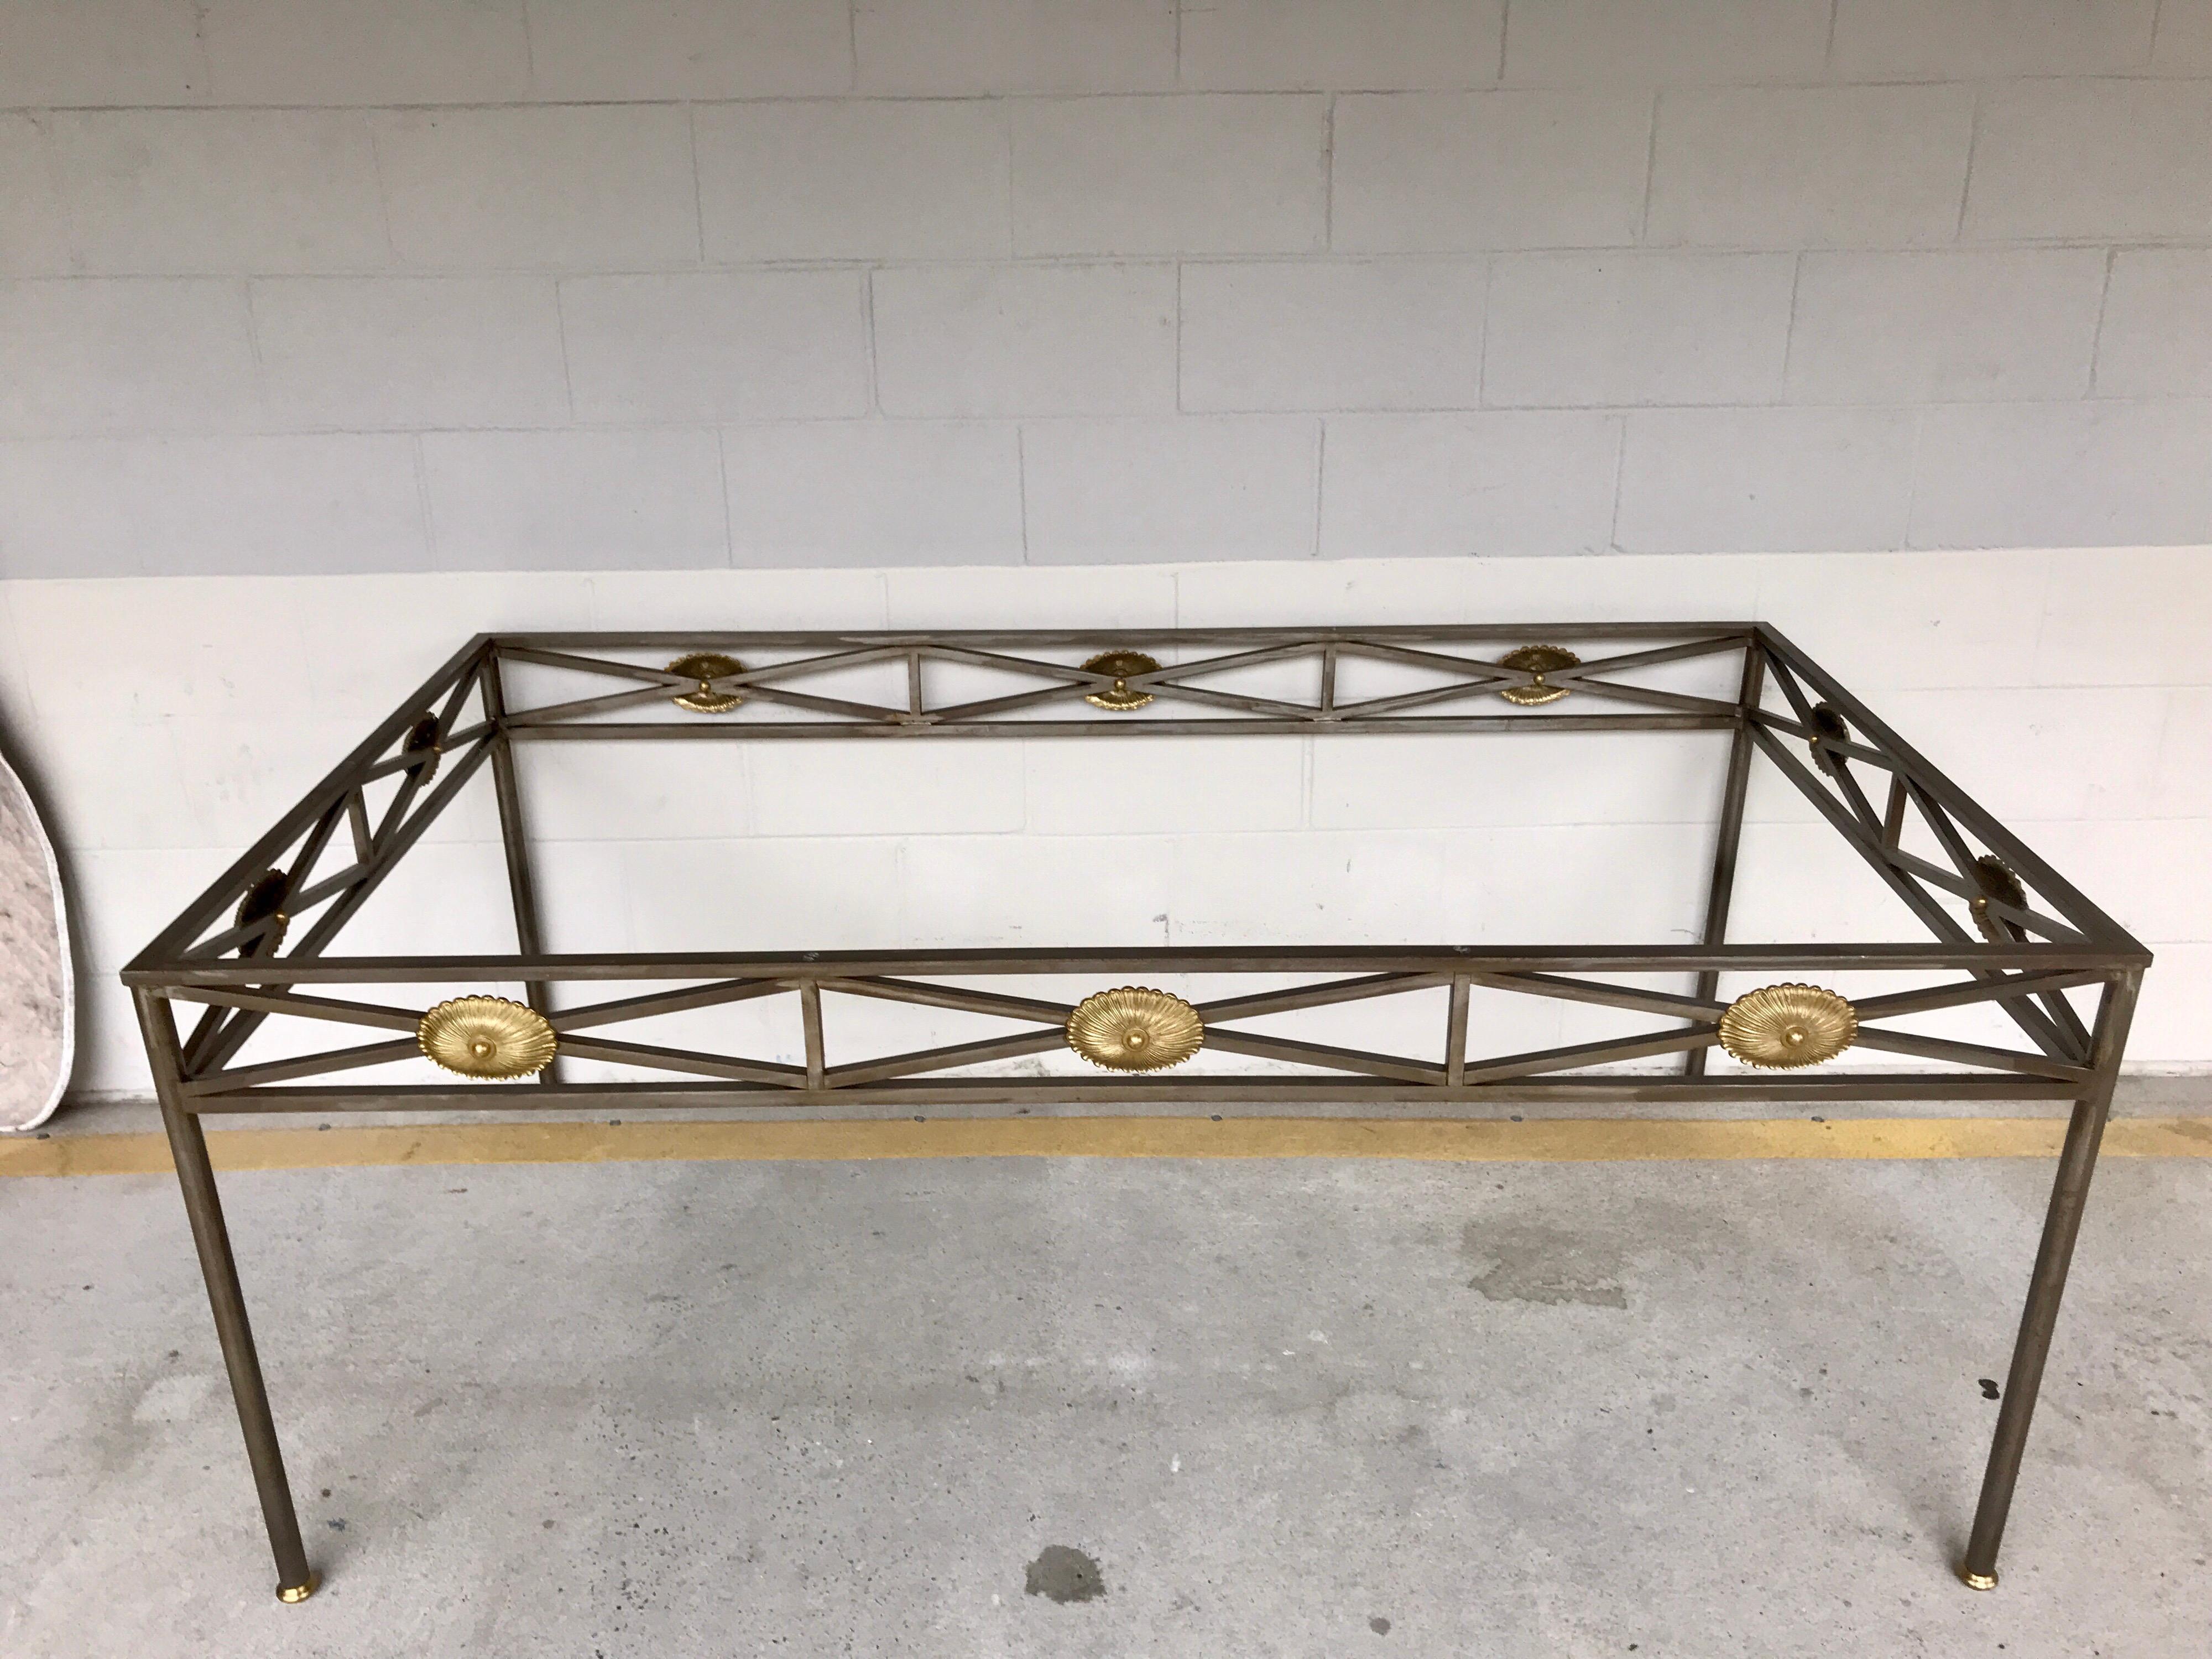 Maison Jansen style neoclassical steel and bronze dining table base. Of rectangular form with brushed steel and gilt bronze rosettes, raised on four bronze sabot fitted legs. This base does not include a top. The base measures 70.5